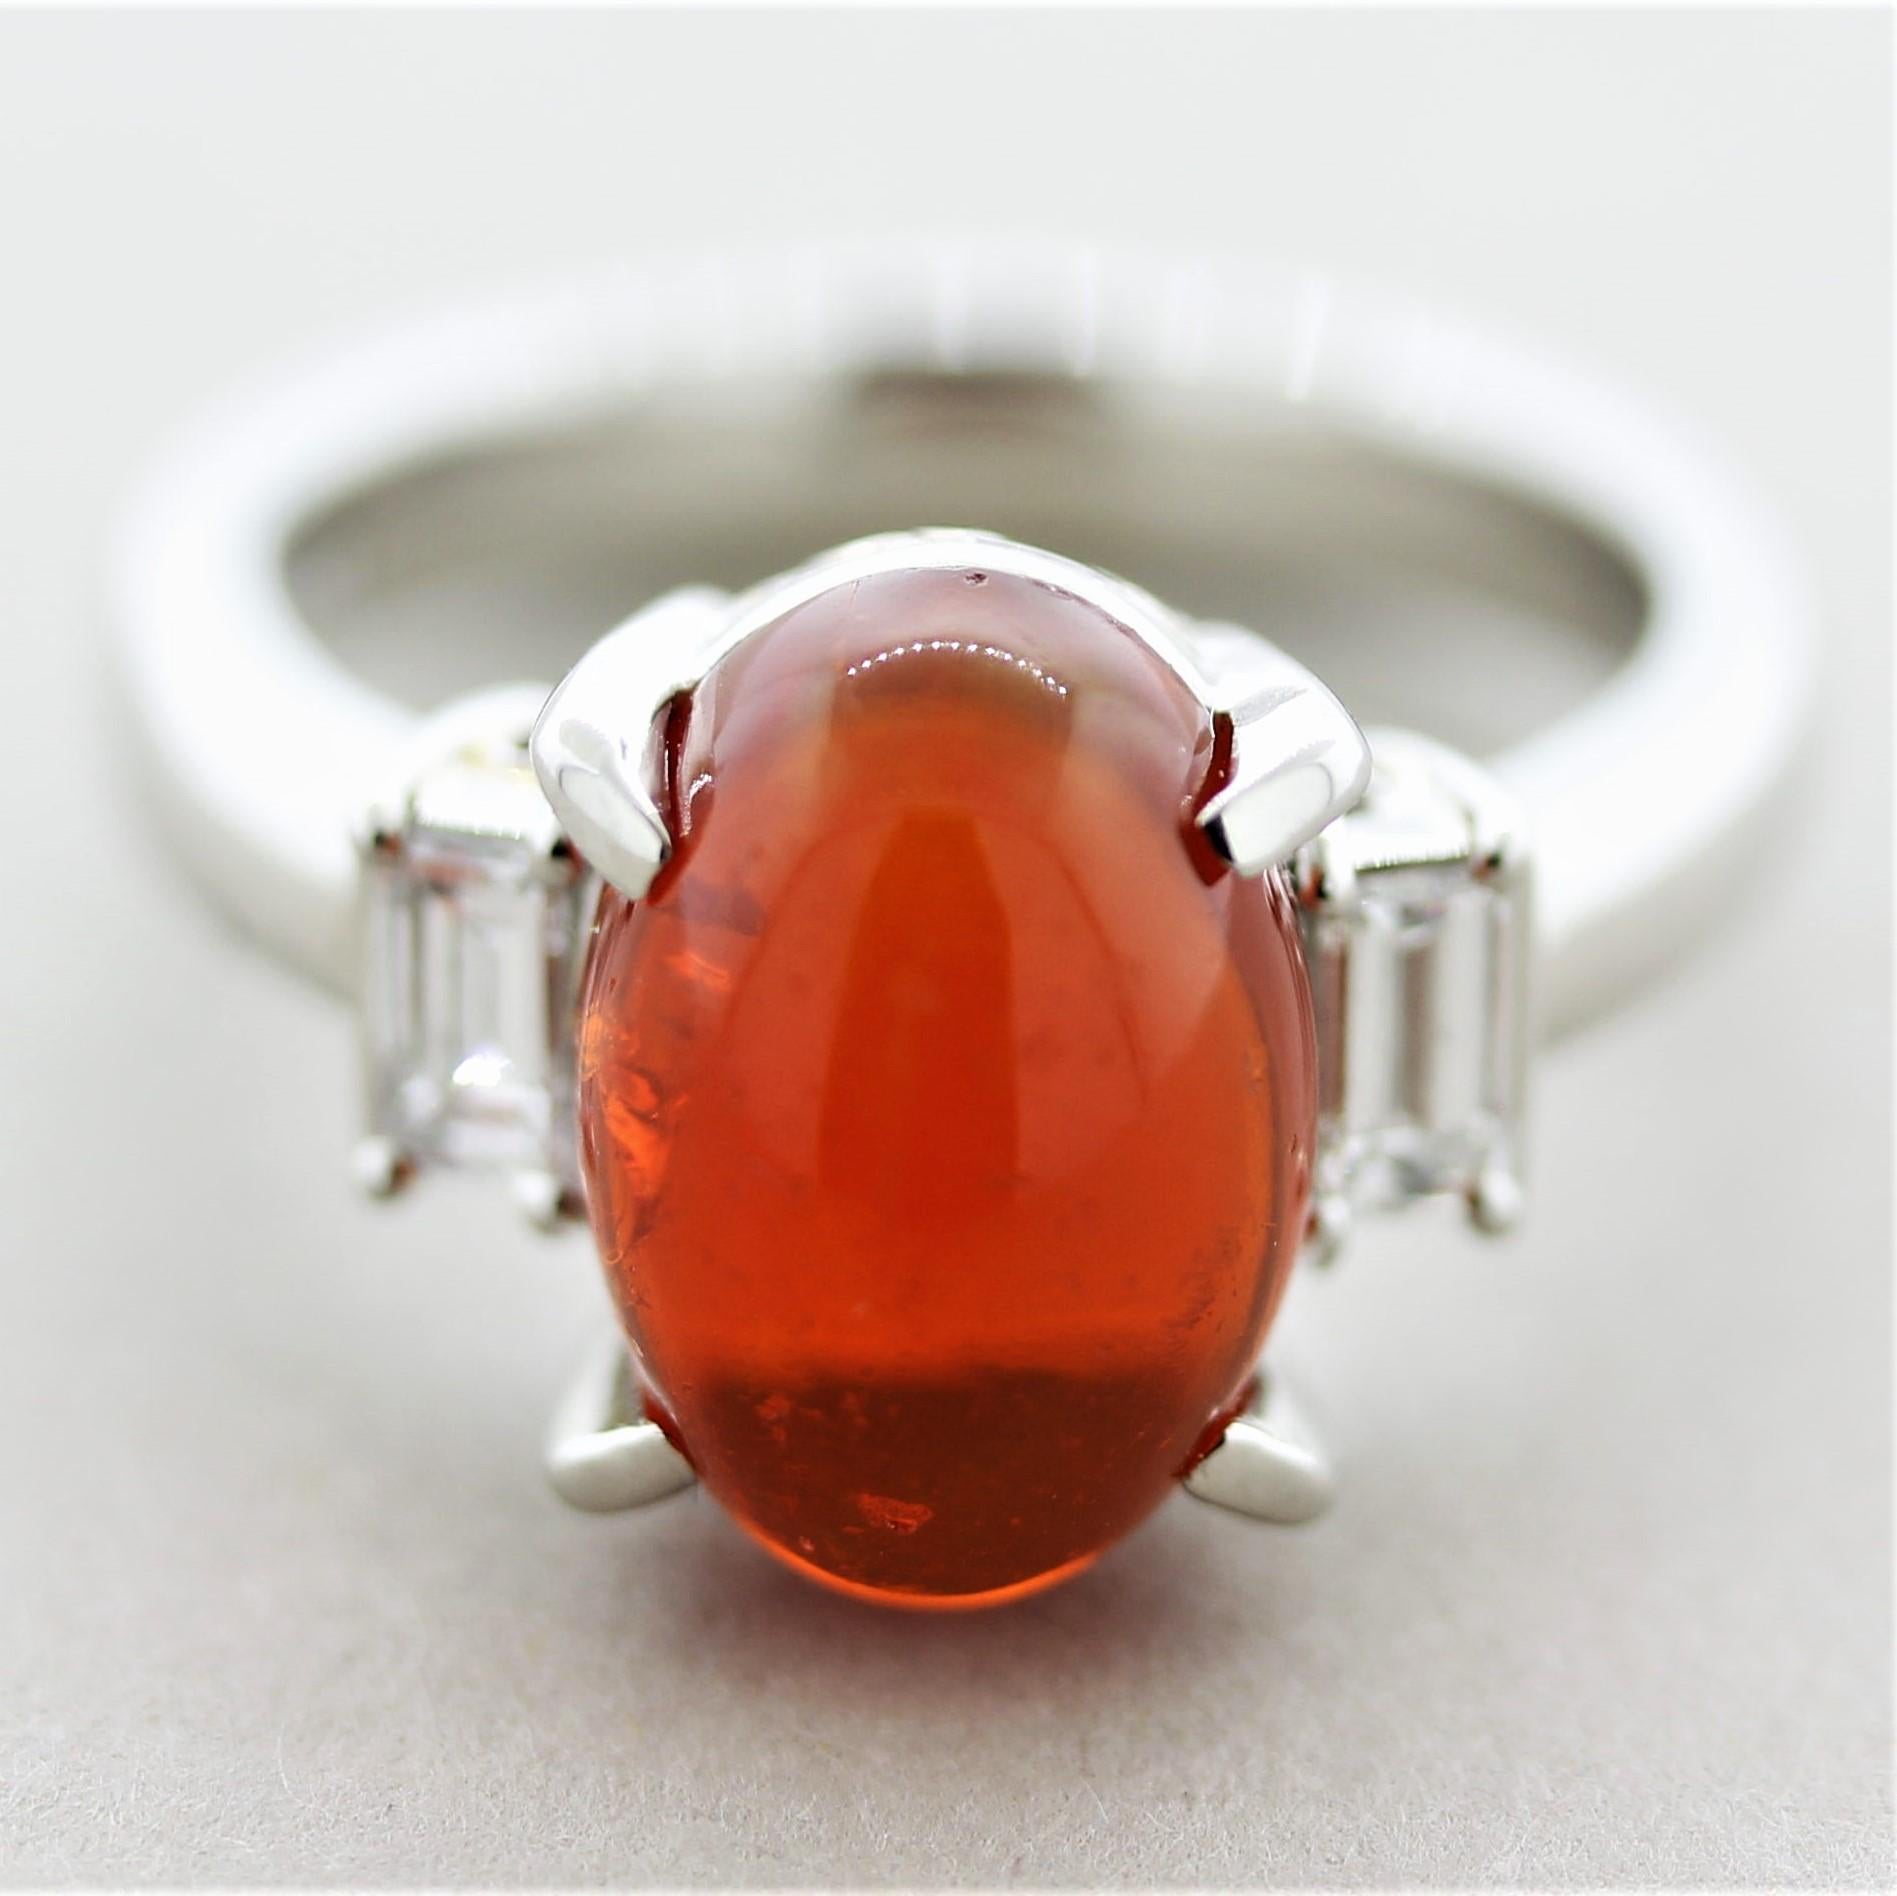 A classic 3-stone design, this lovely ring features a fine 3.65 carat fire opal with play-of-color. Fire opals are known for their intense deep red color but rarely show play of color. This example has a fine intense color as well as showing flashes